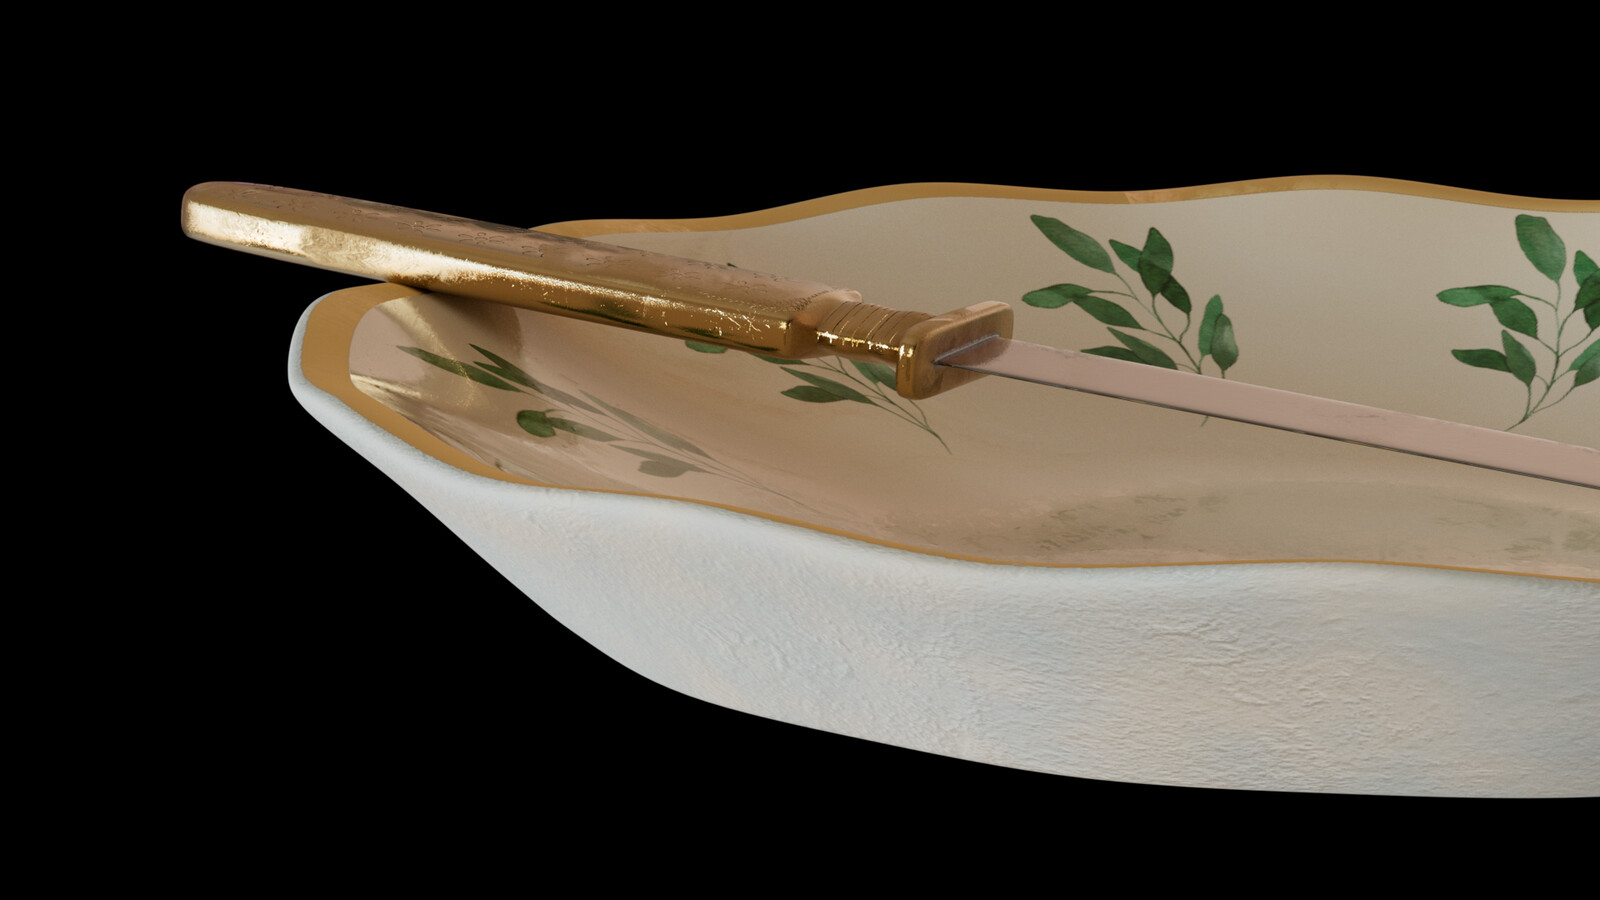 Still showing details of knife and plate.